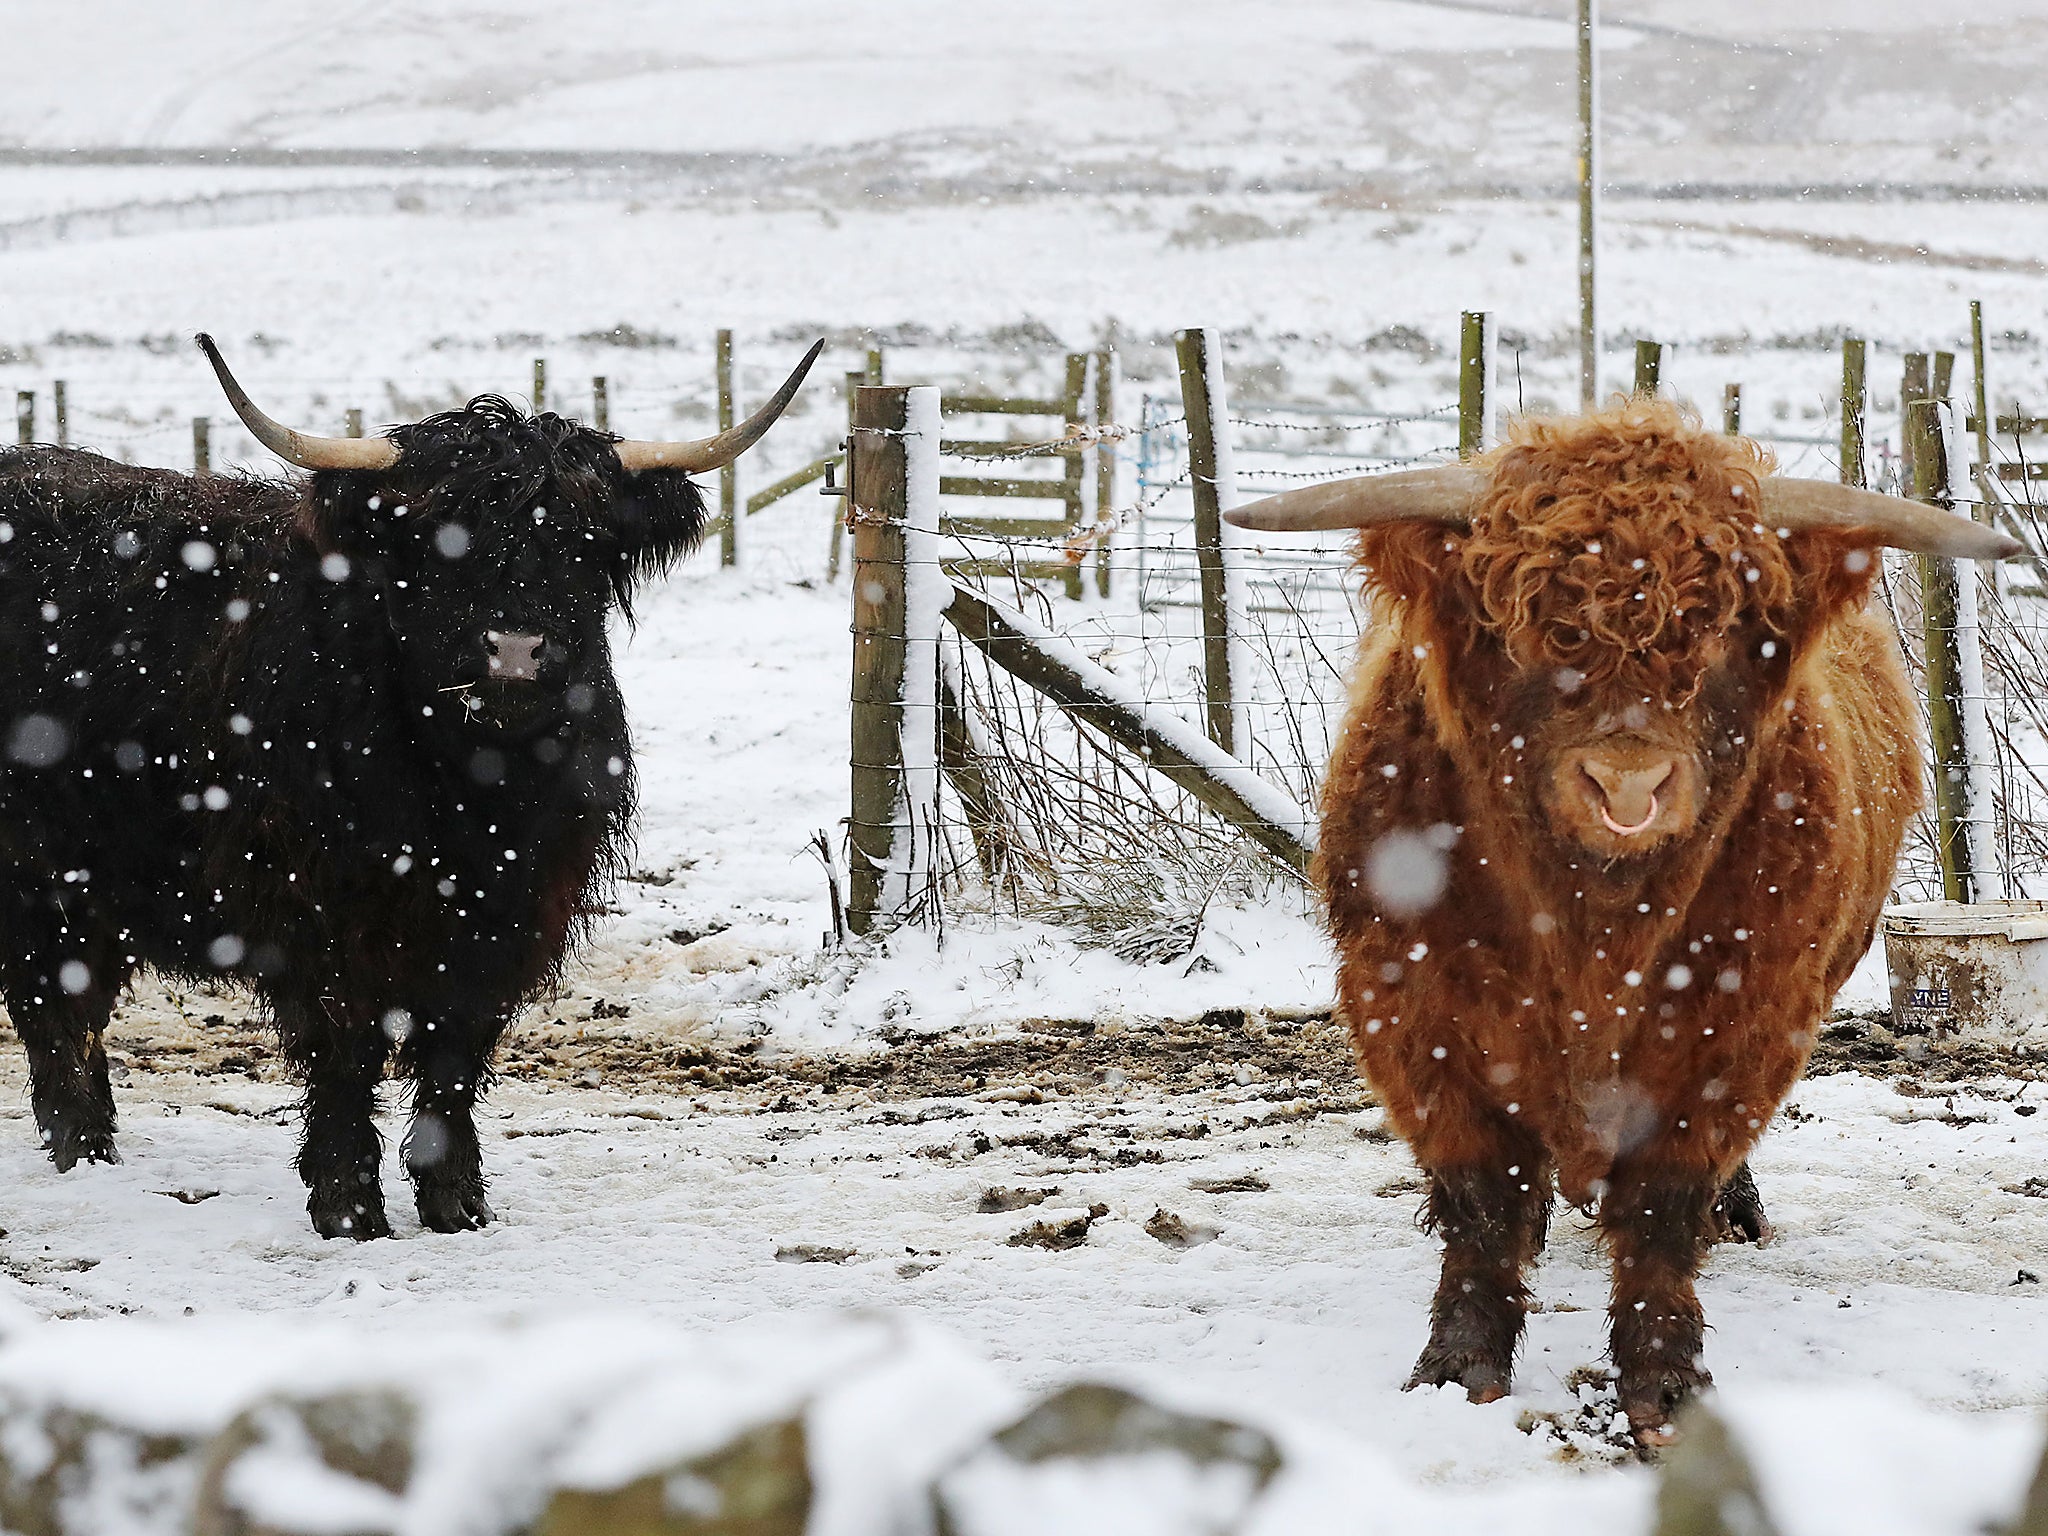 Despite having a special breed of cattle designed to cope with the cold weather, Scots have no problems believing scientists about climate change